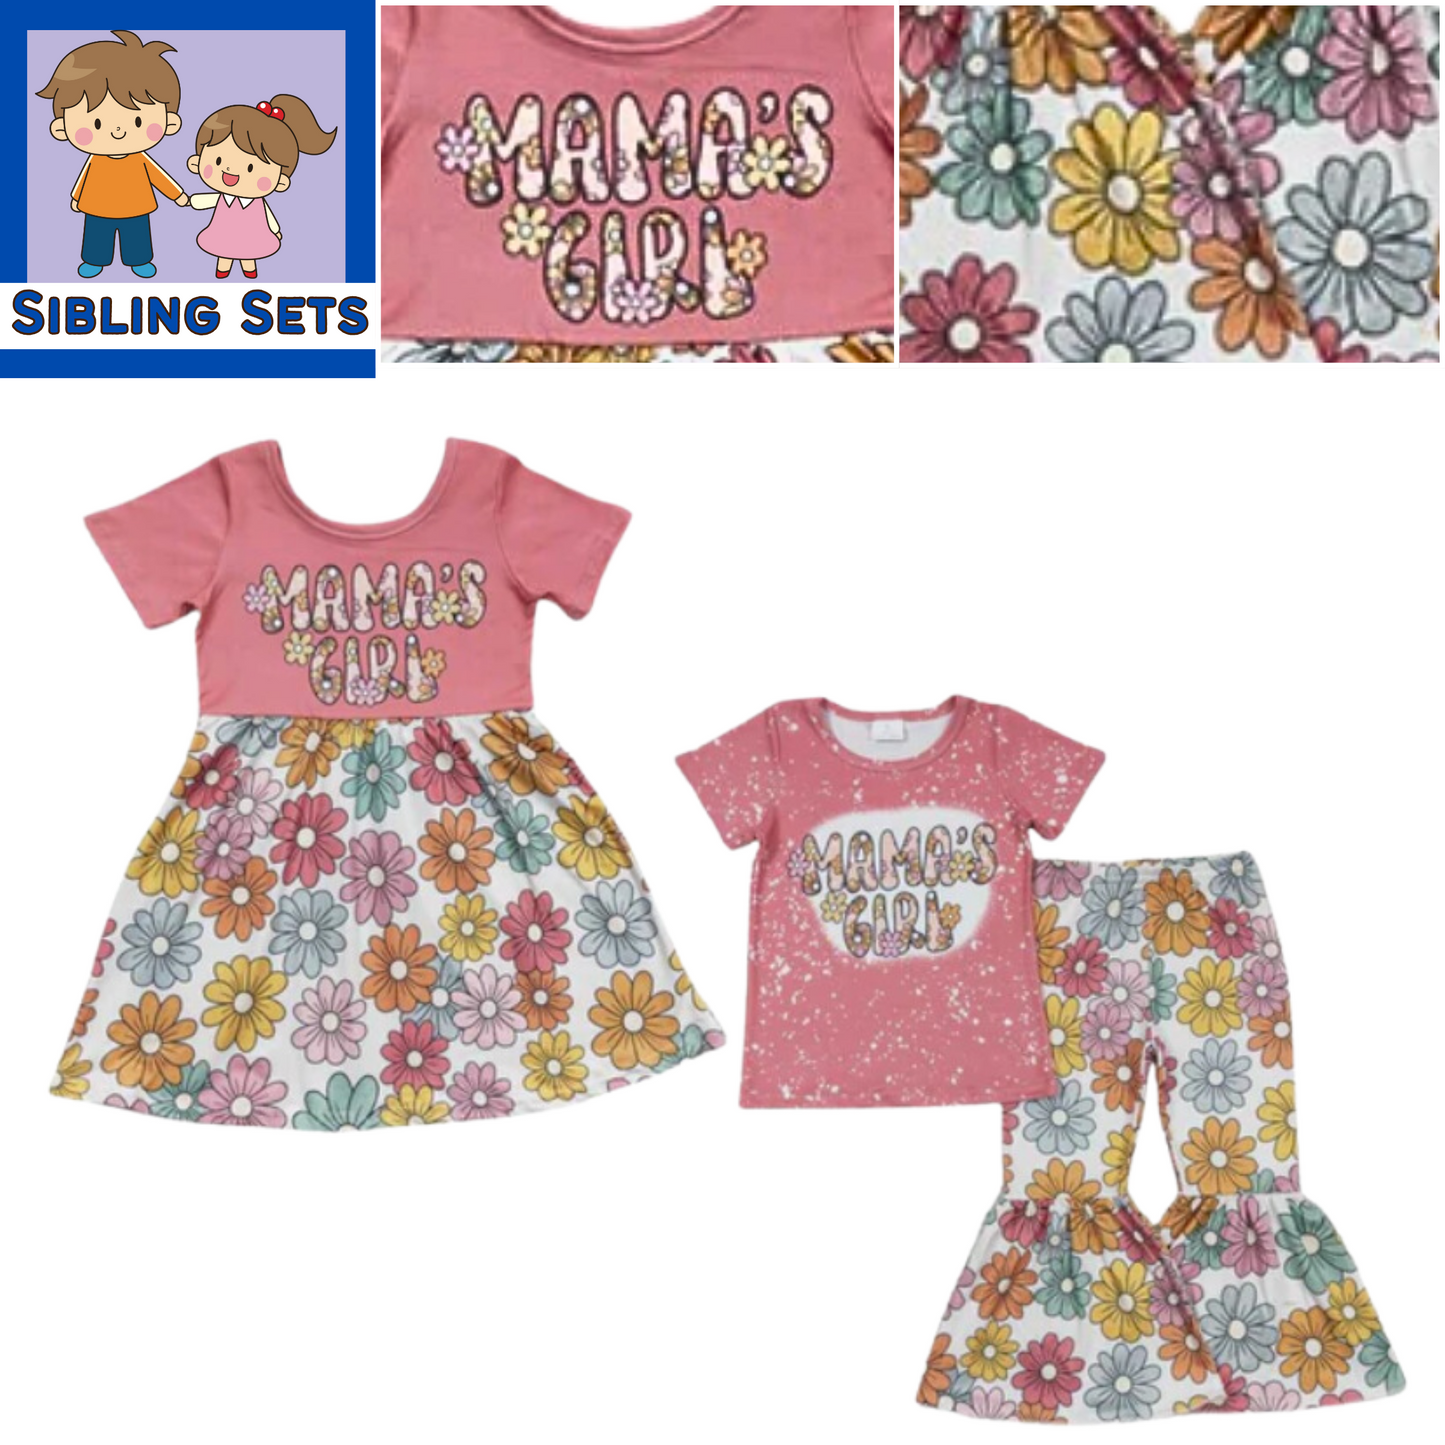 Groovy Floral MAMA'S GIRL Pink Daisy Outfit - Kids